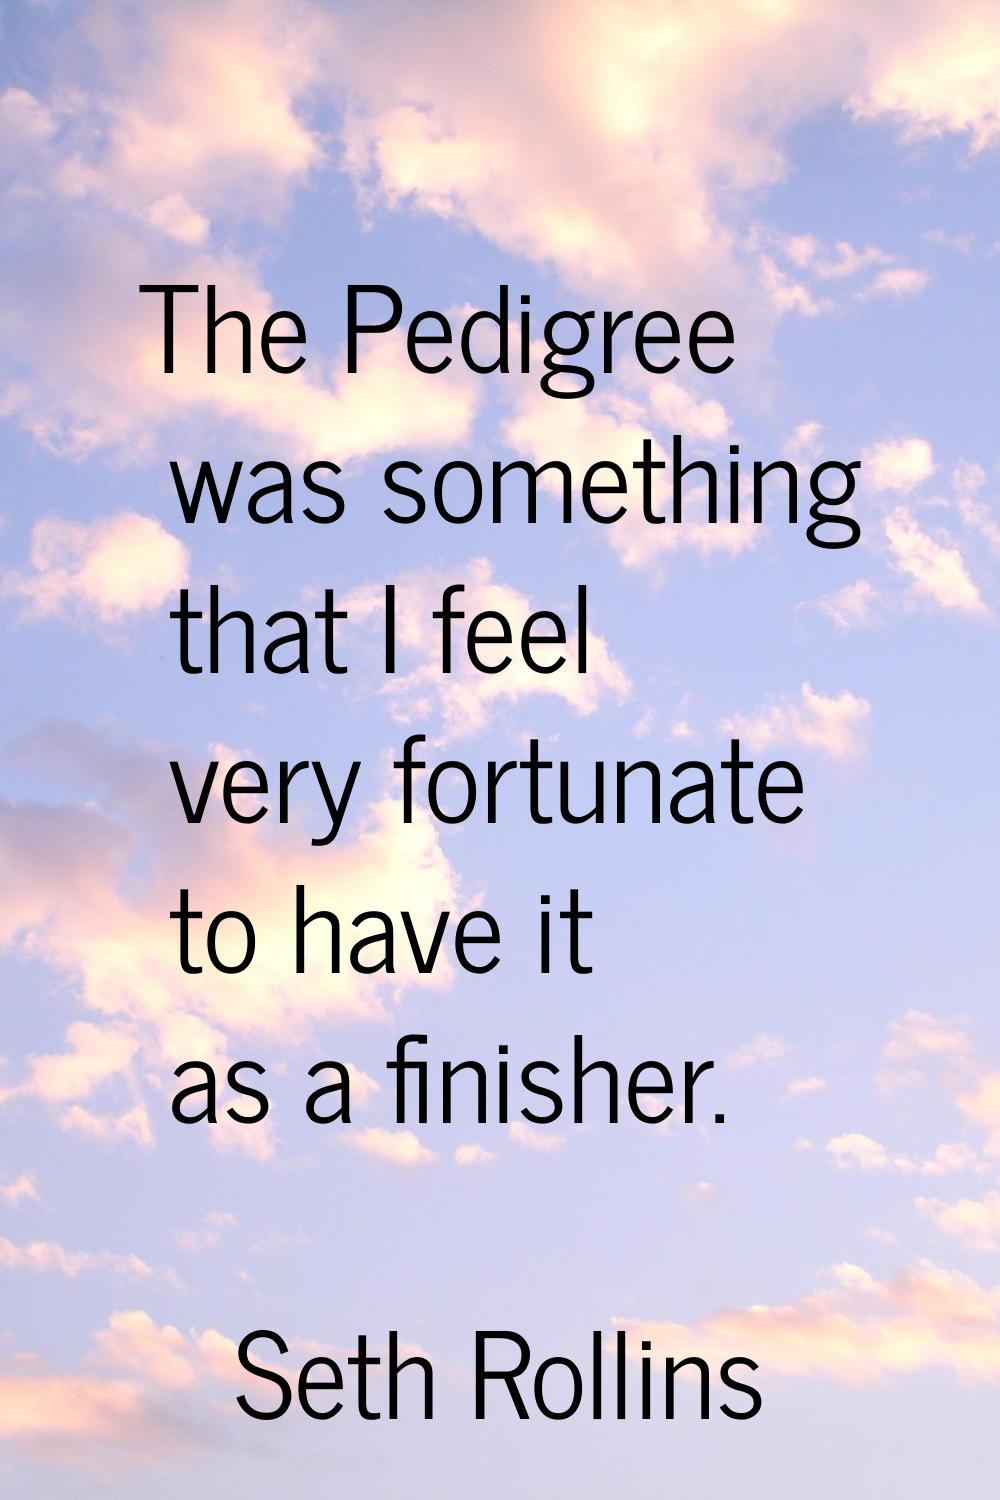 The Pedigree was something that I feel very fortunate to have it as a finisher.